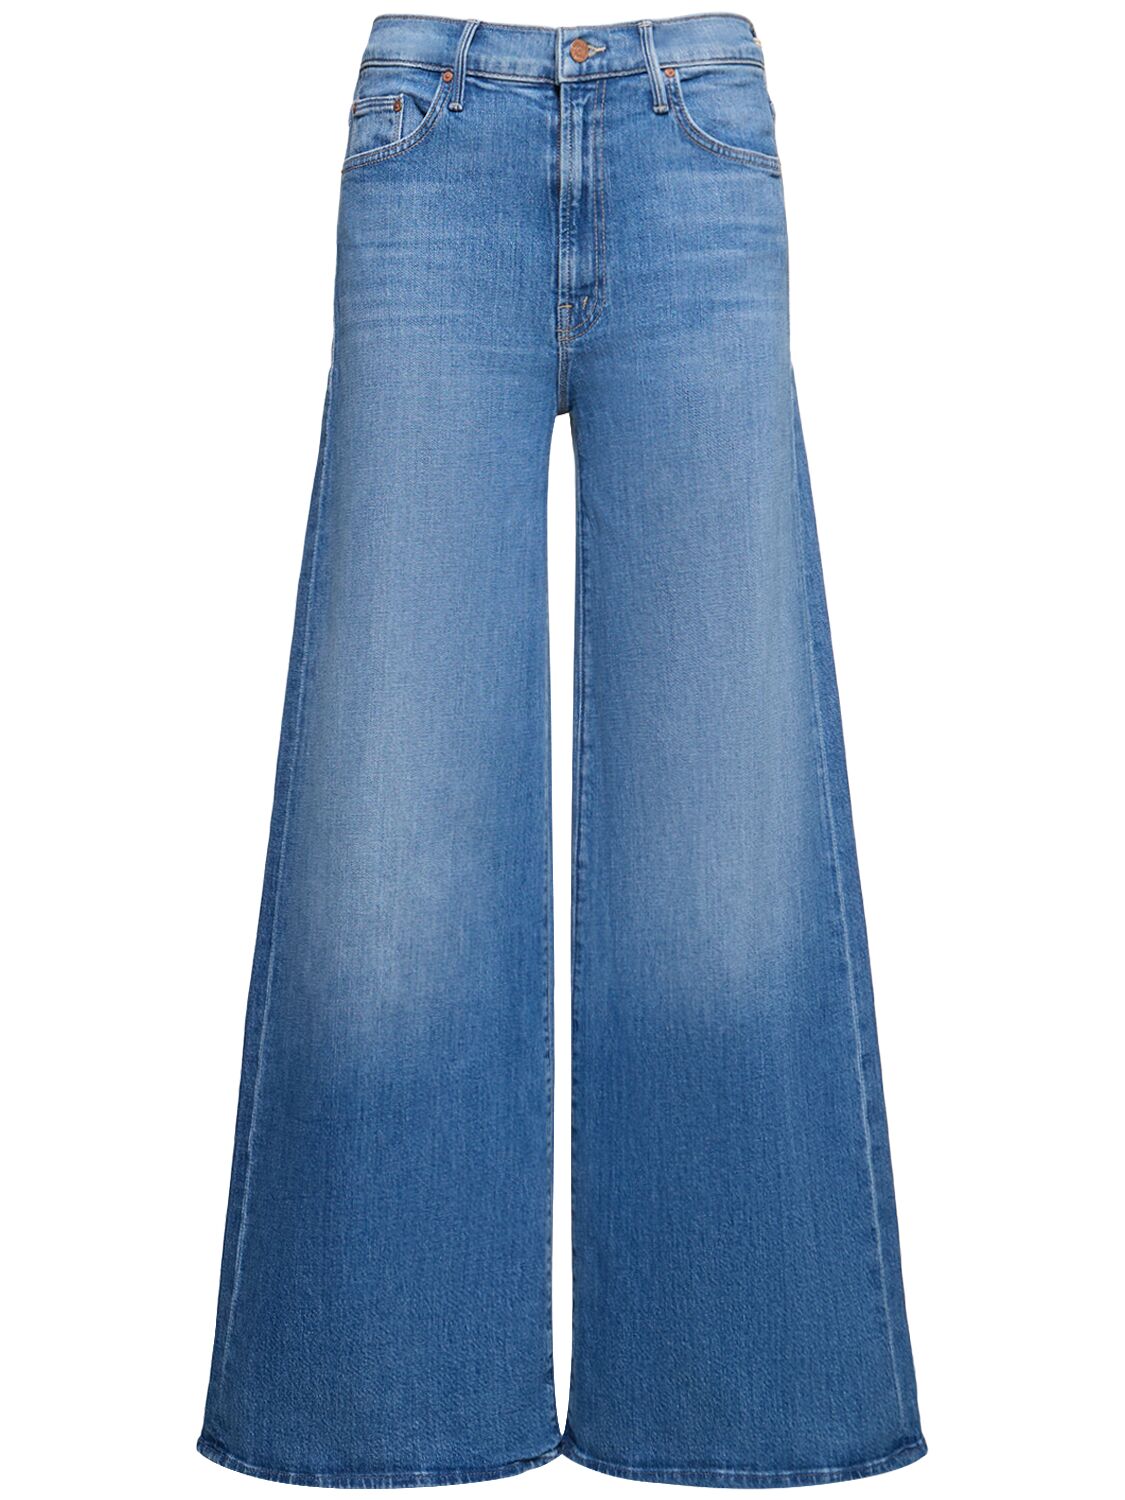 Image of The Undercover Flared Denim Jeans